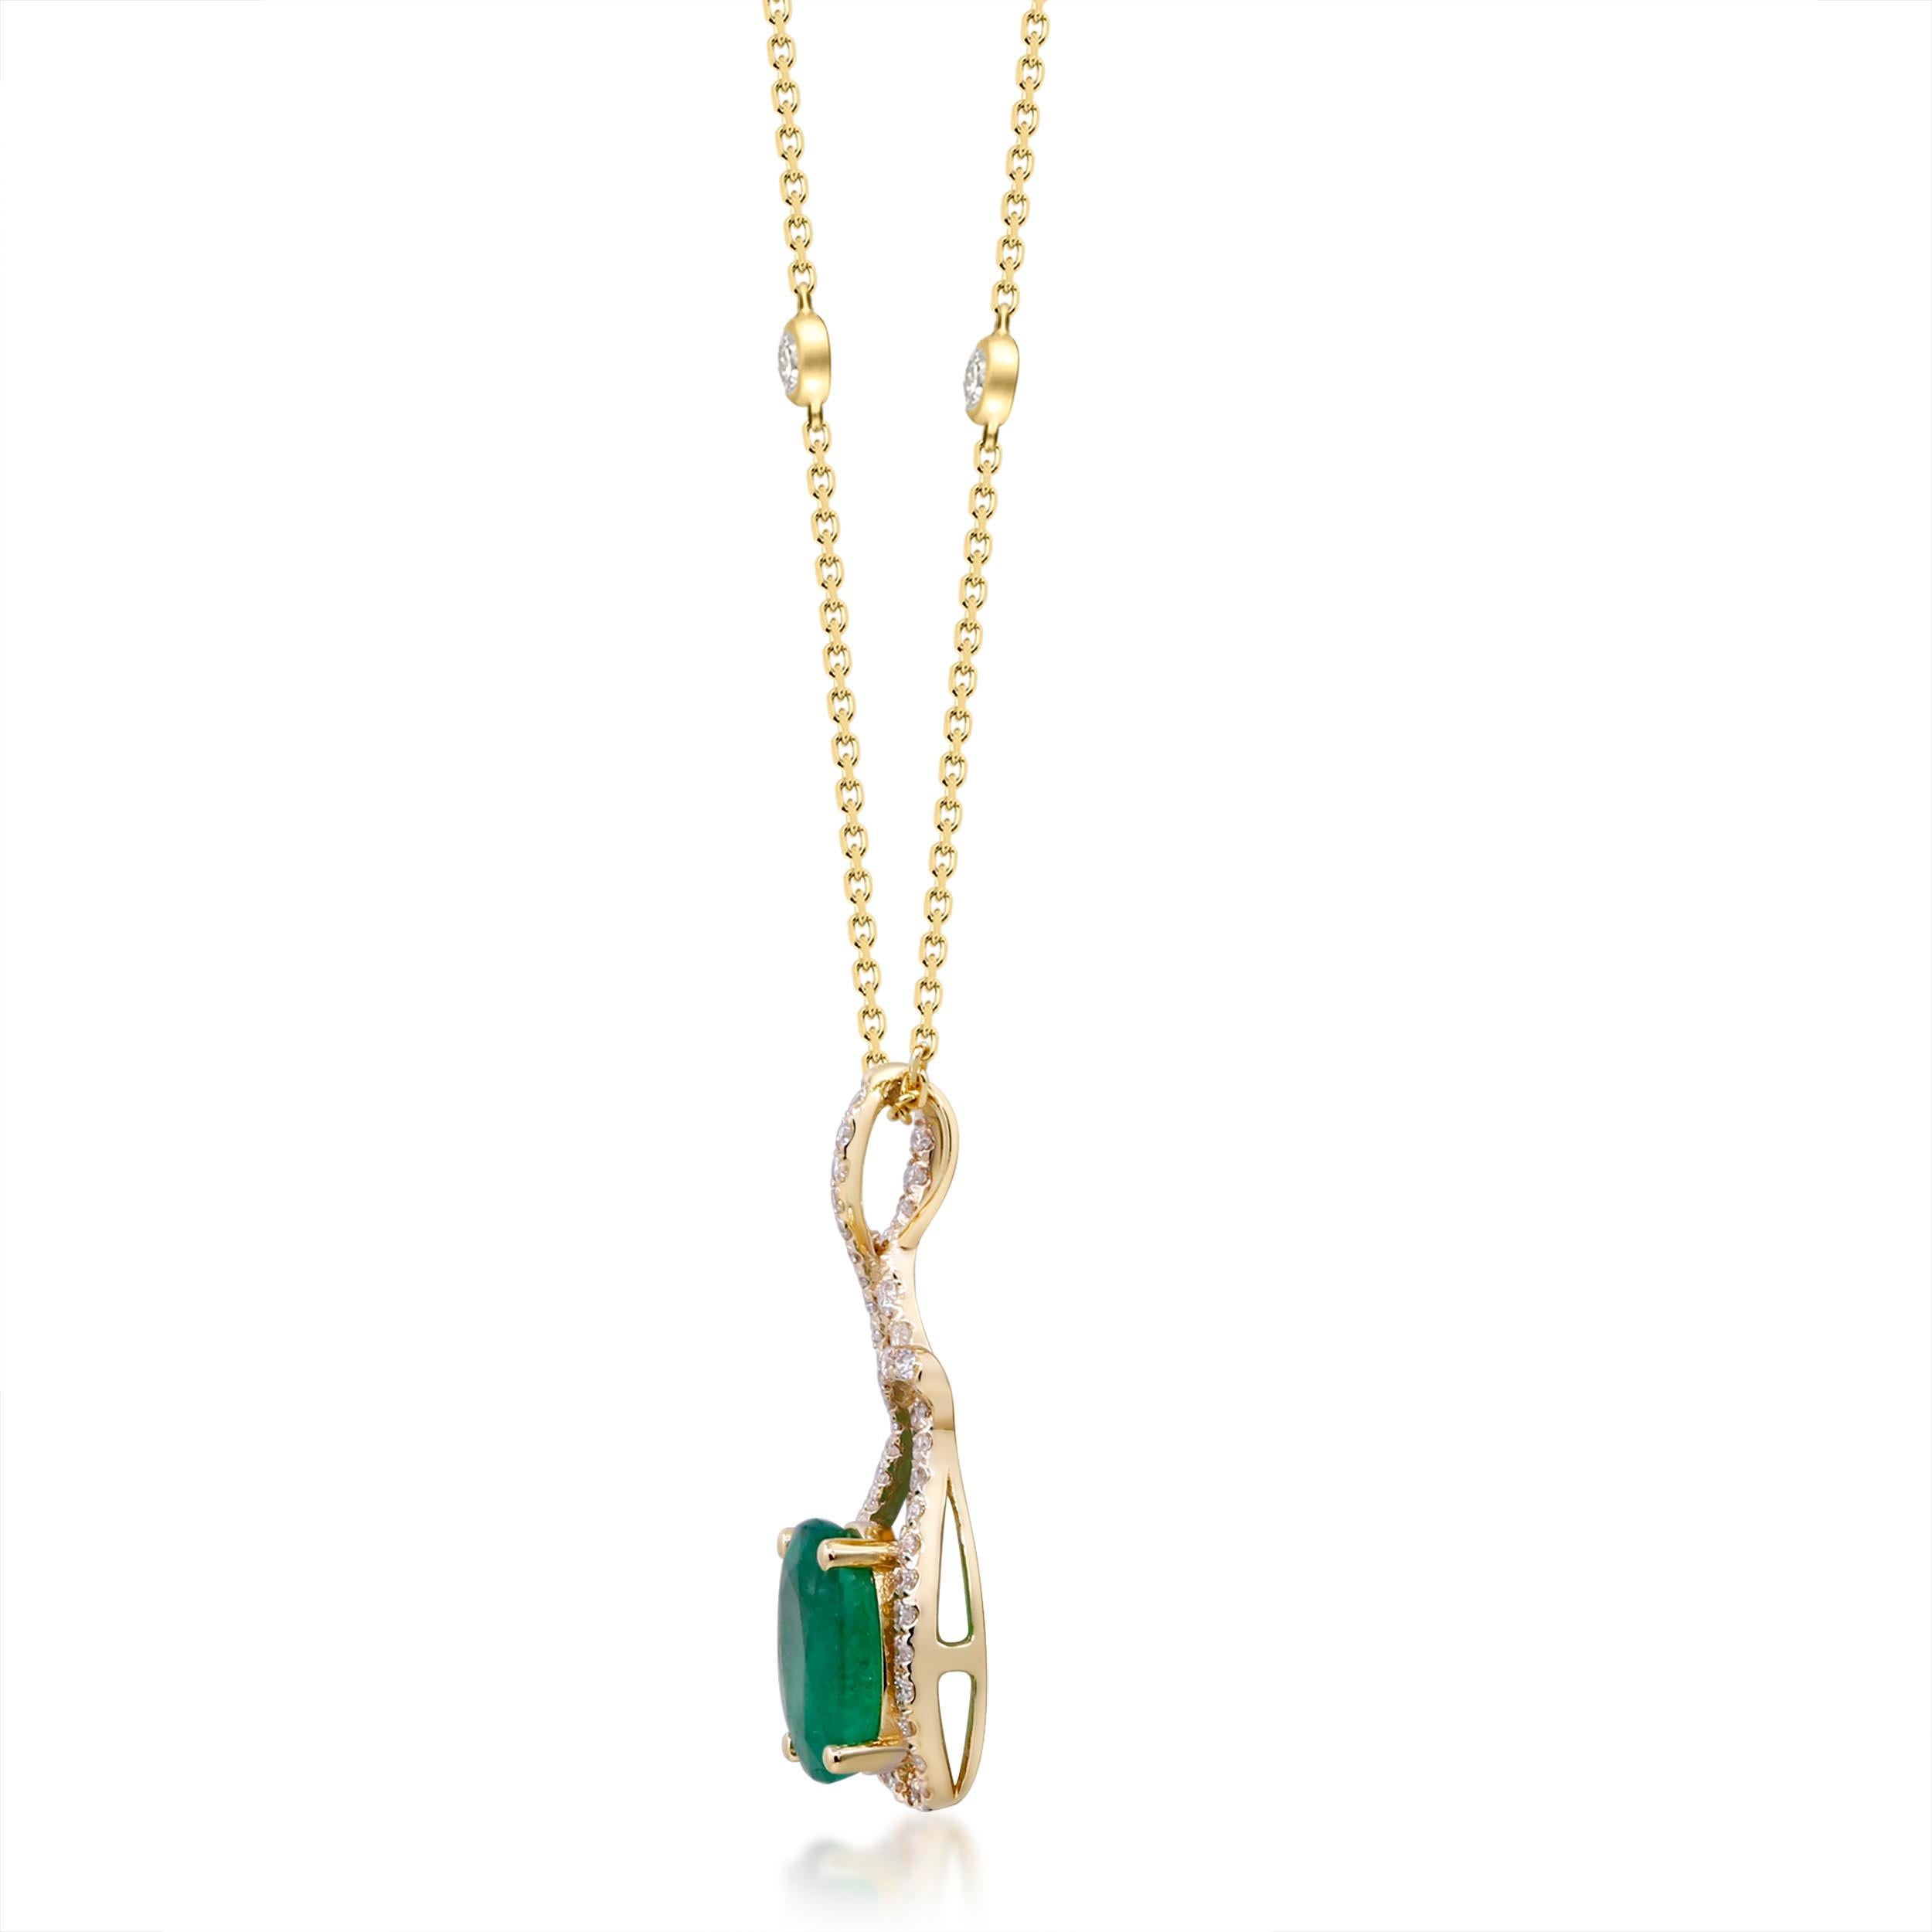 Decorate yourself in elegance with this Pendant is crafted from 14-karat Yellow Gold by Gin & Grace Pendant. This Pendant is made Oval-Cut Prong setting Natural Emerald (1 Pcs) 0.17 Carat and Round-Cut Prong setting Natural White Diamond (48 Pcs)